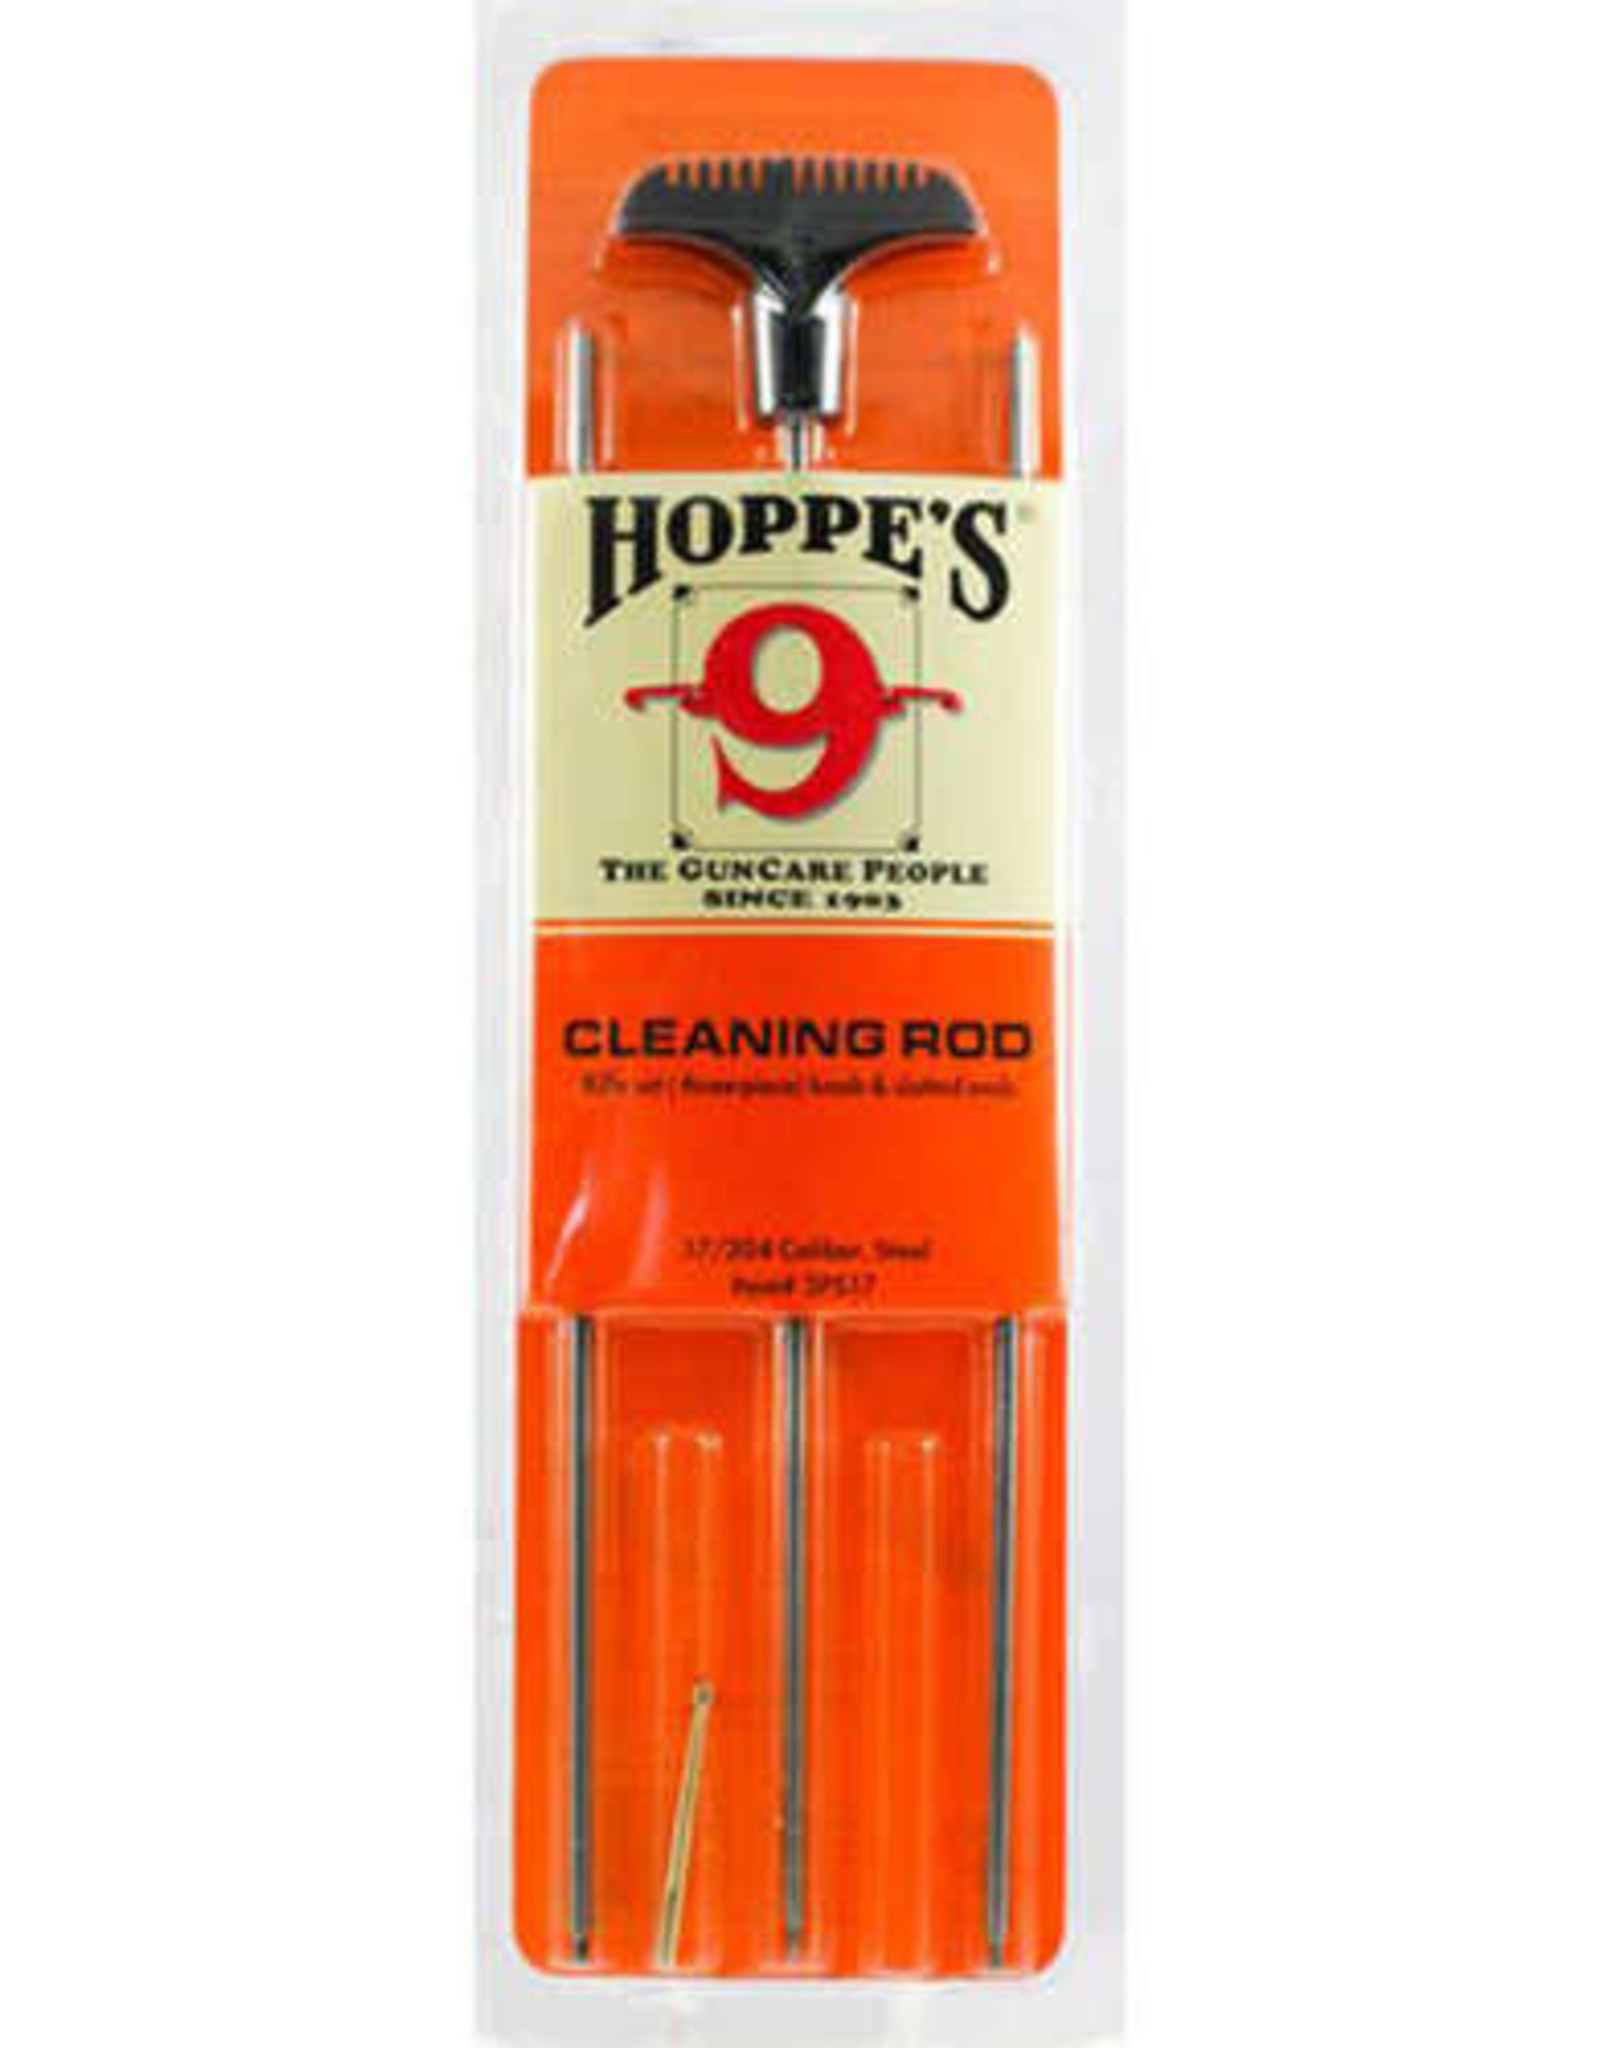 Hoppe’s Rifle Cleaning Rod .17 .204 Caliber Steel, 3 Piece, Clam